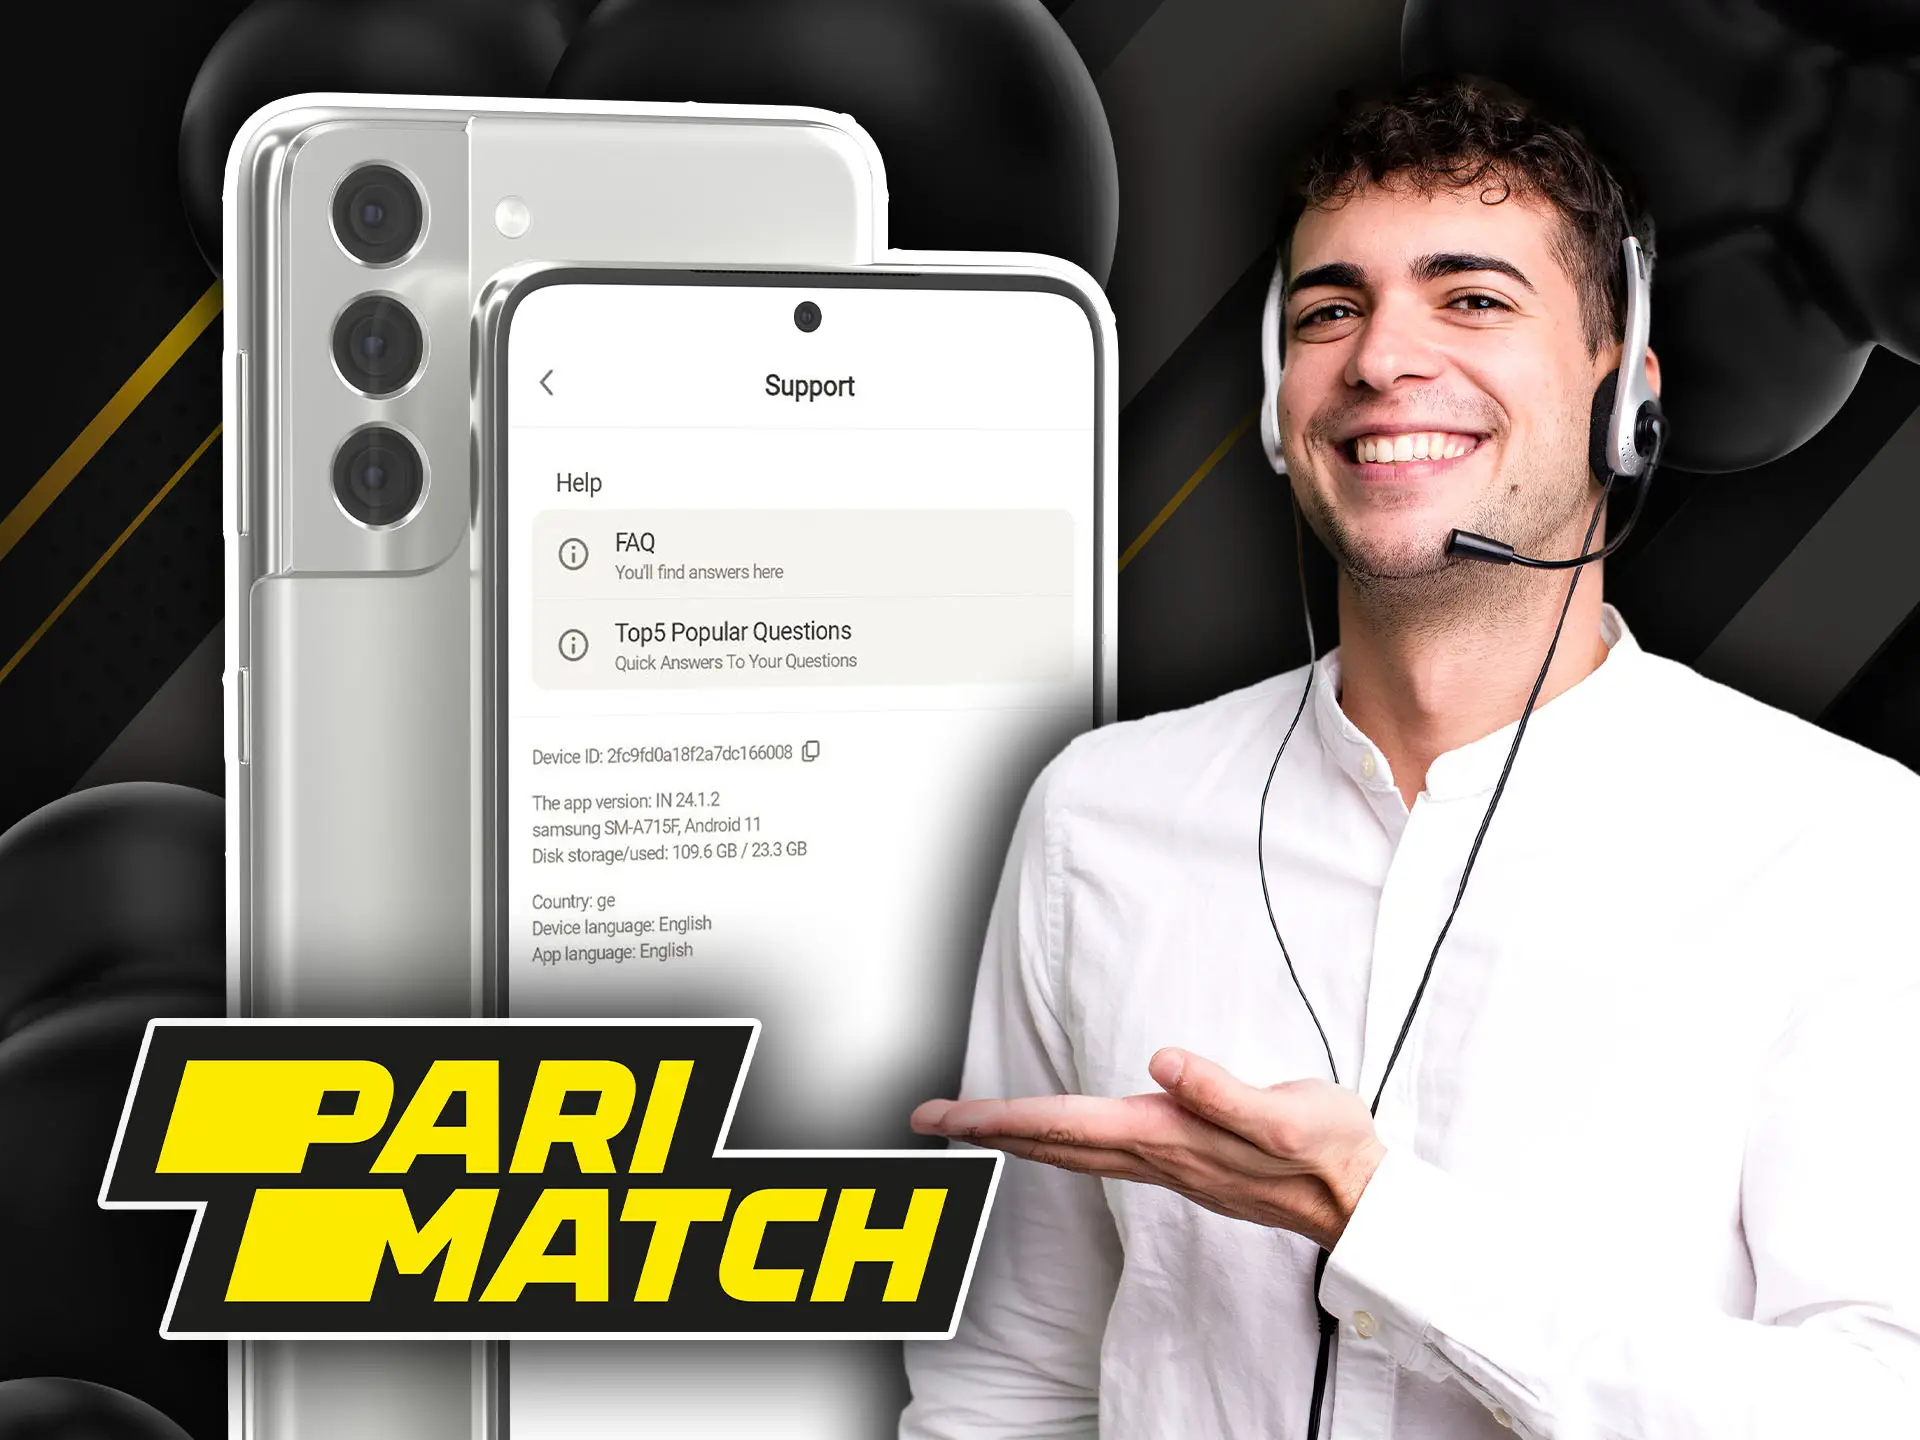 Parimatch app support for India.